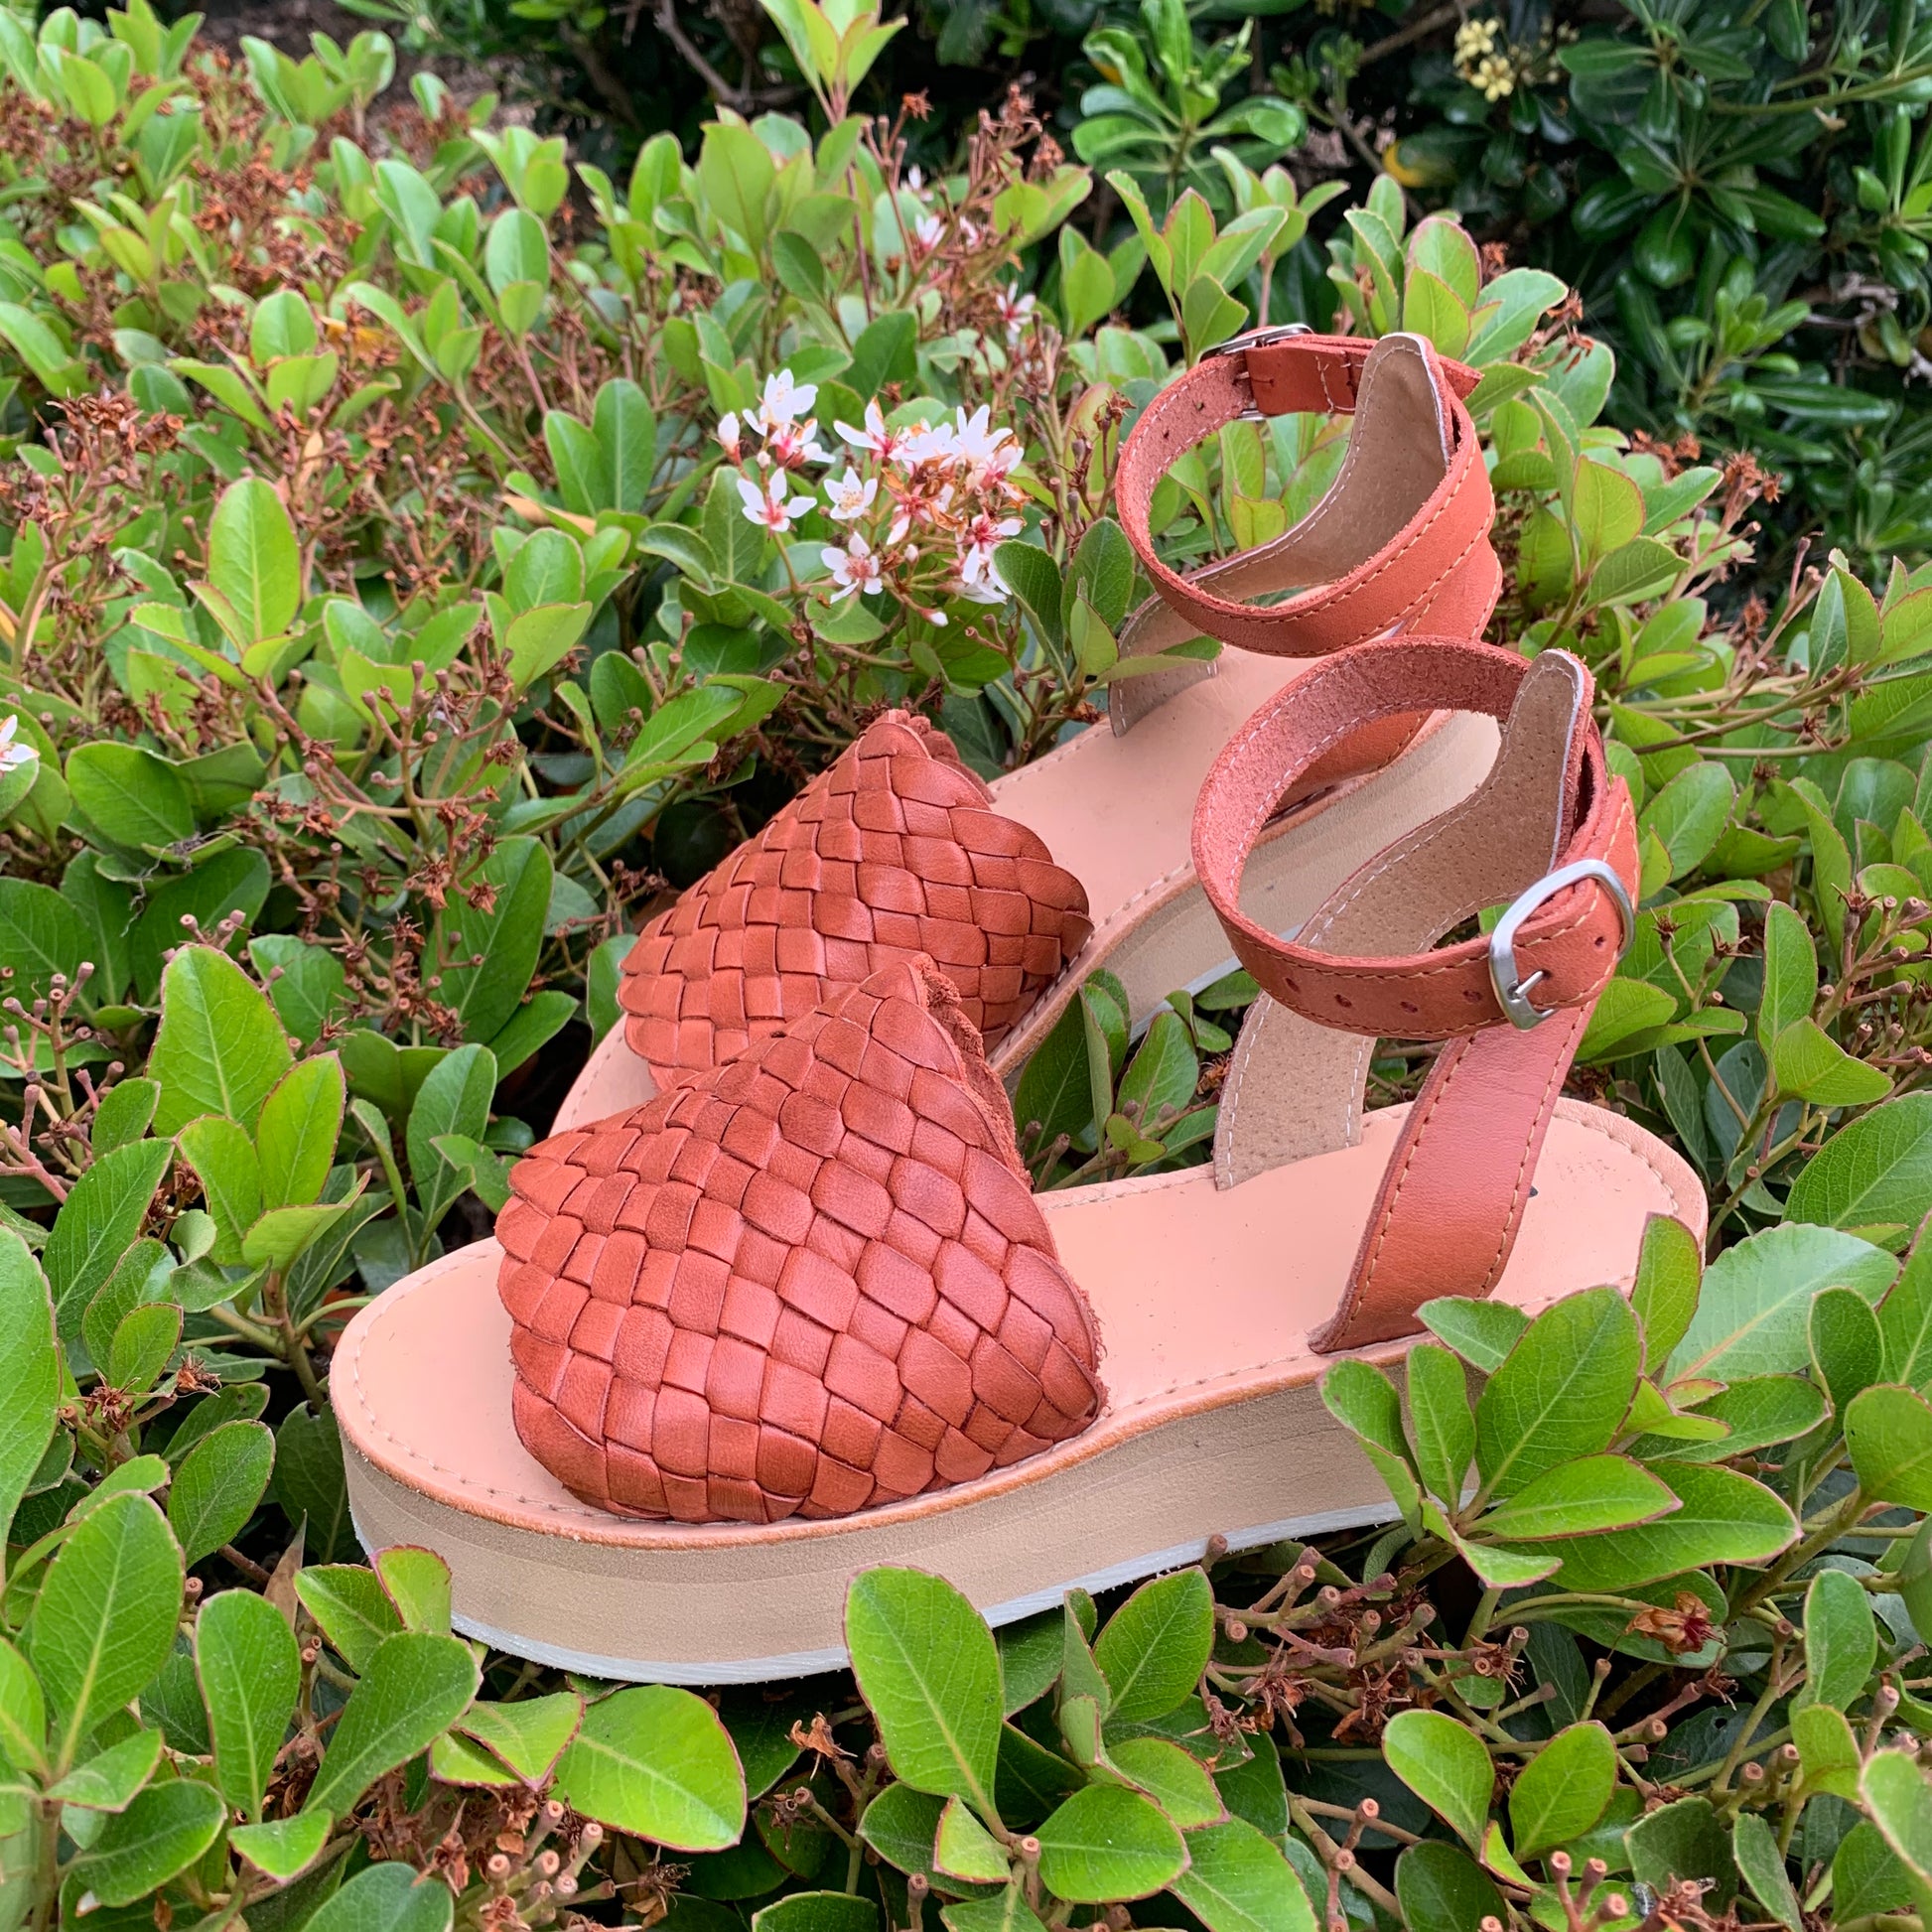 Platform huarache sandals with Ankle Strap, Color Rich Brown, Made in Mexico